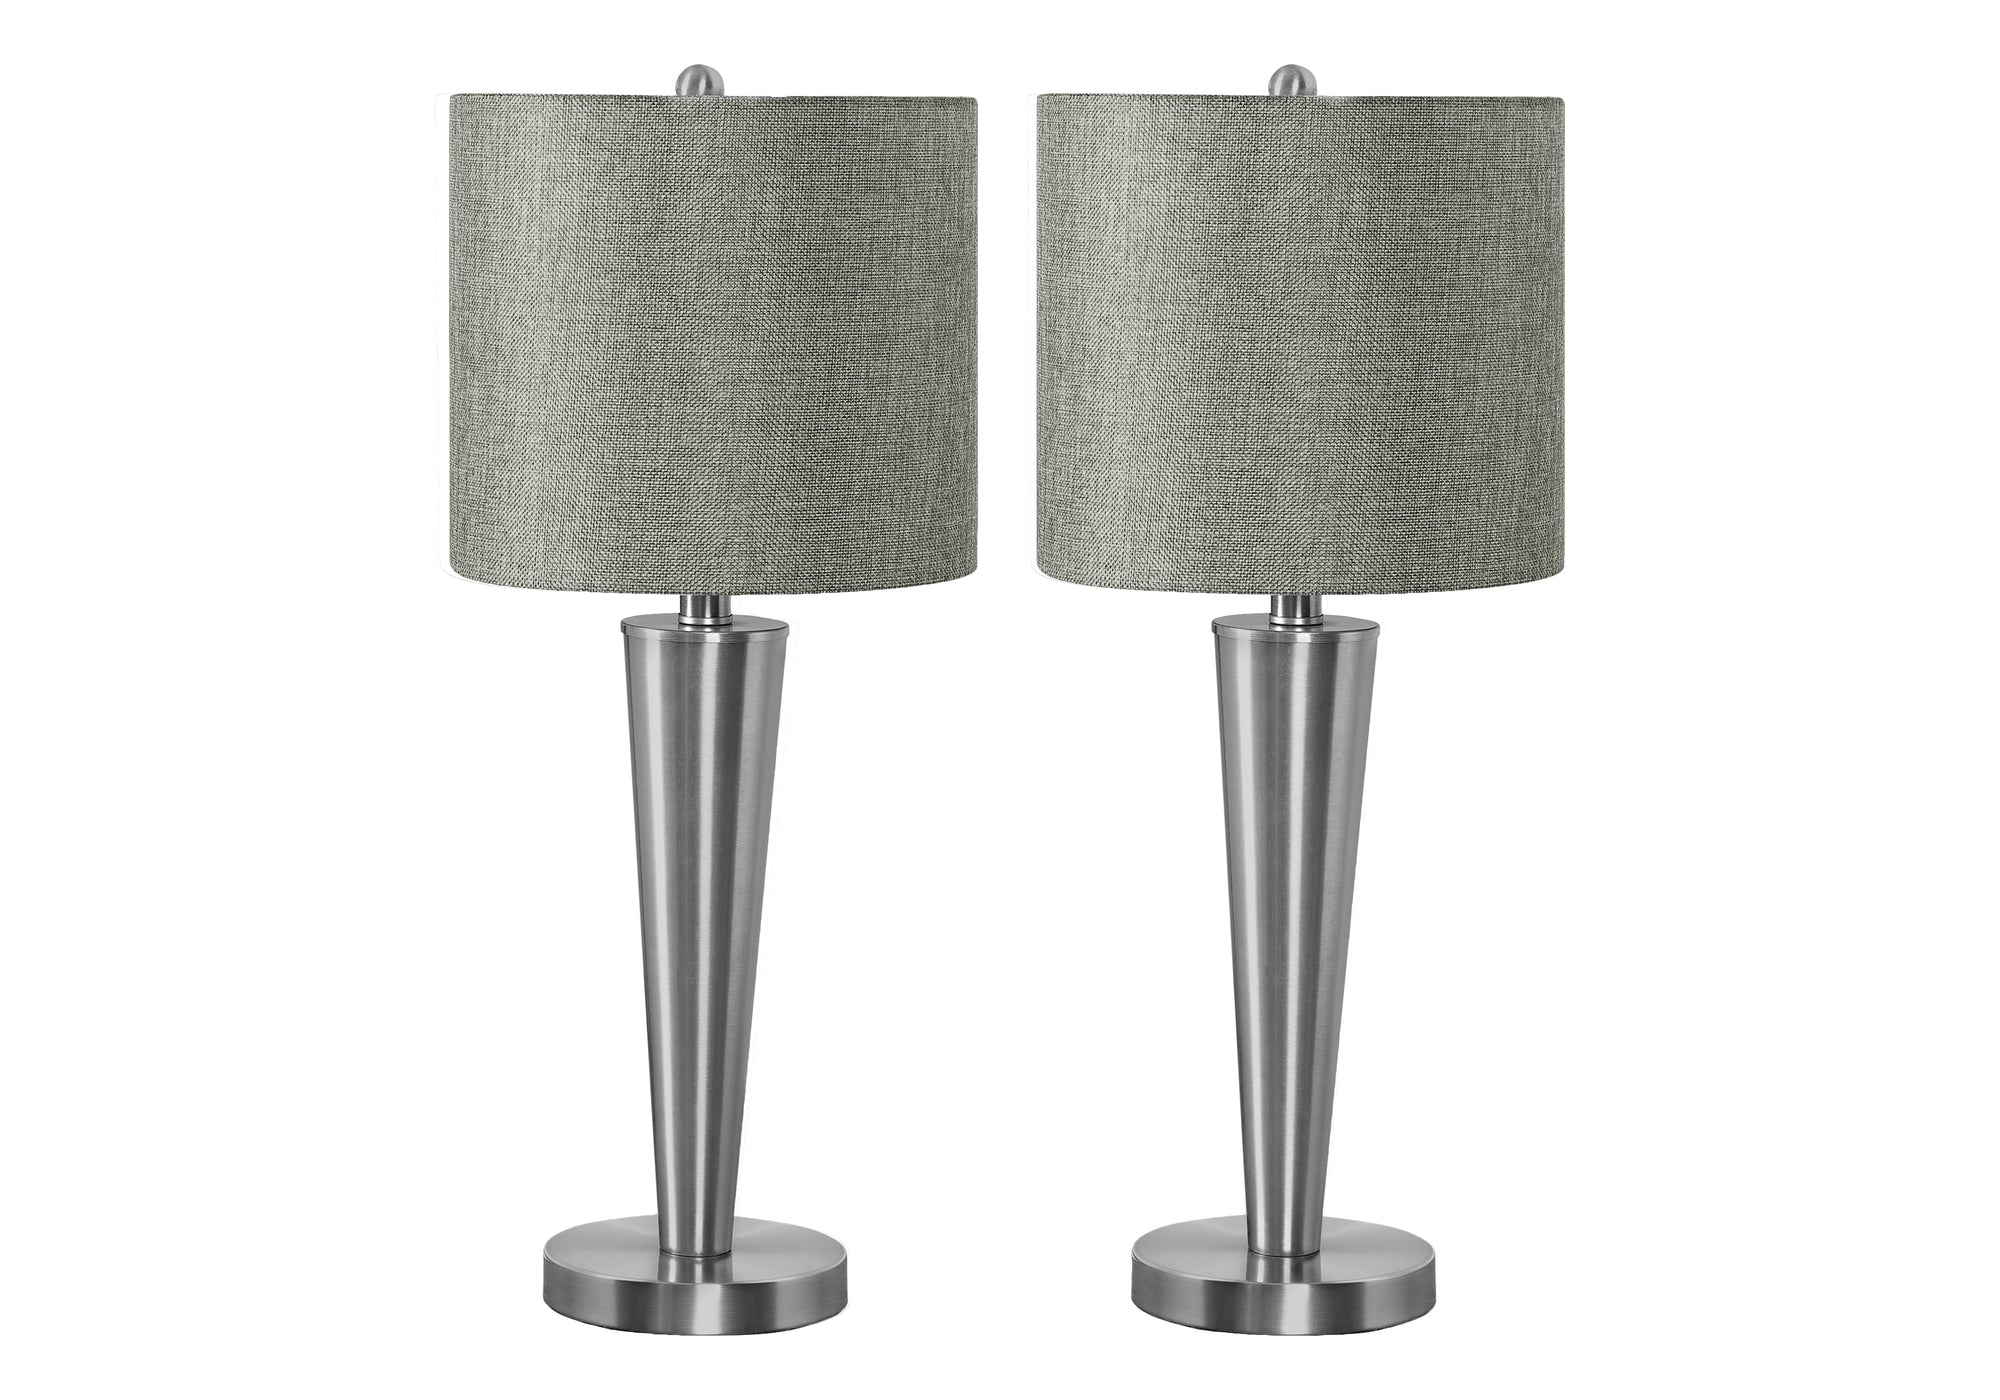 MN-219642    Lighting, Set Of 2, 24"H, Table Lamp, Usb Port Included, Nickel Metal, Grey Shade, Contemporary